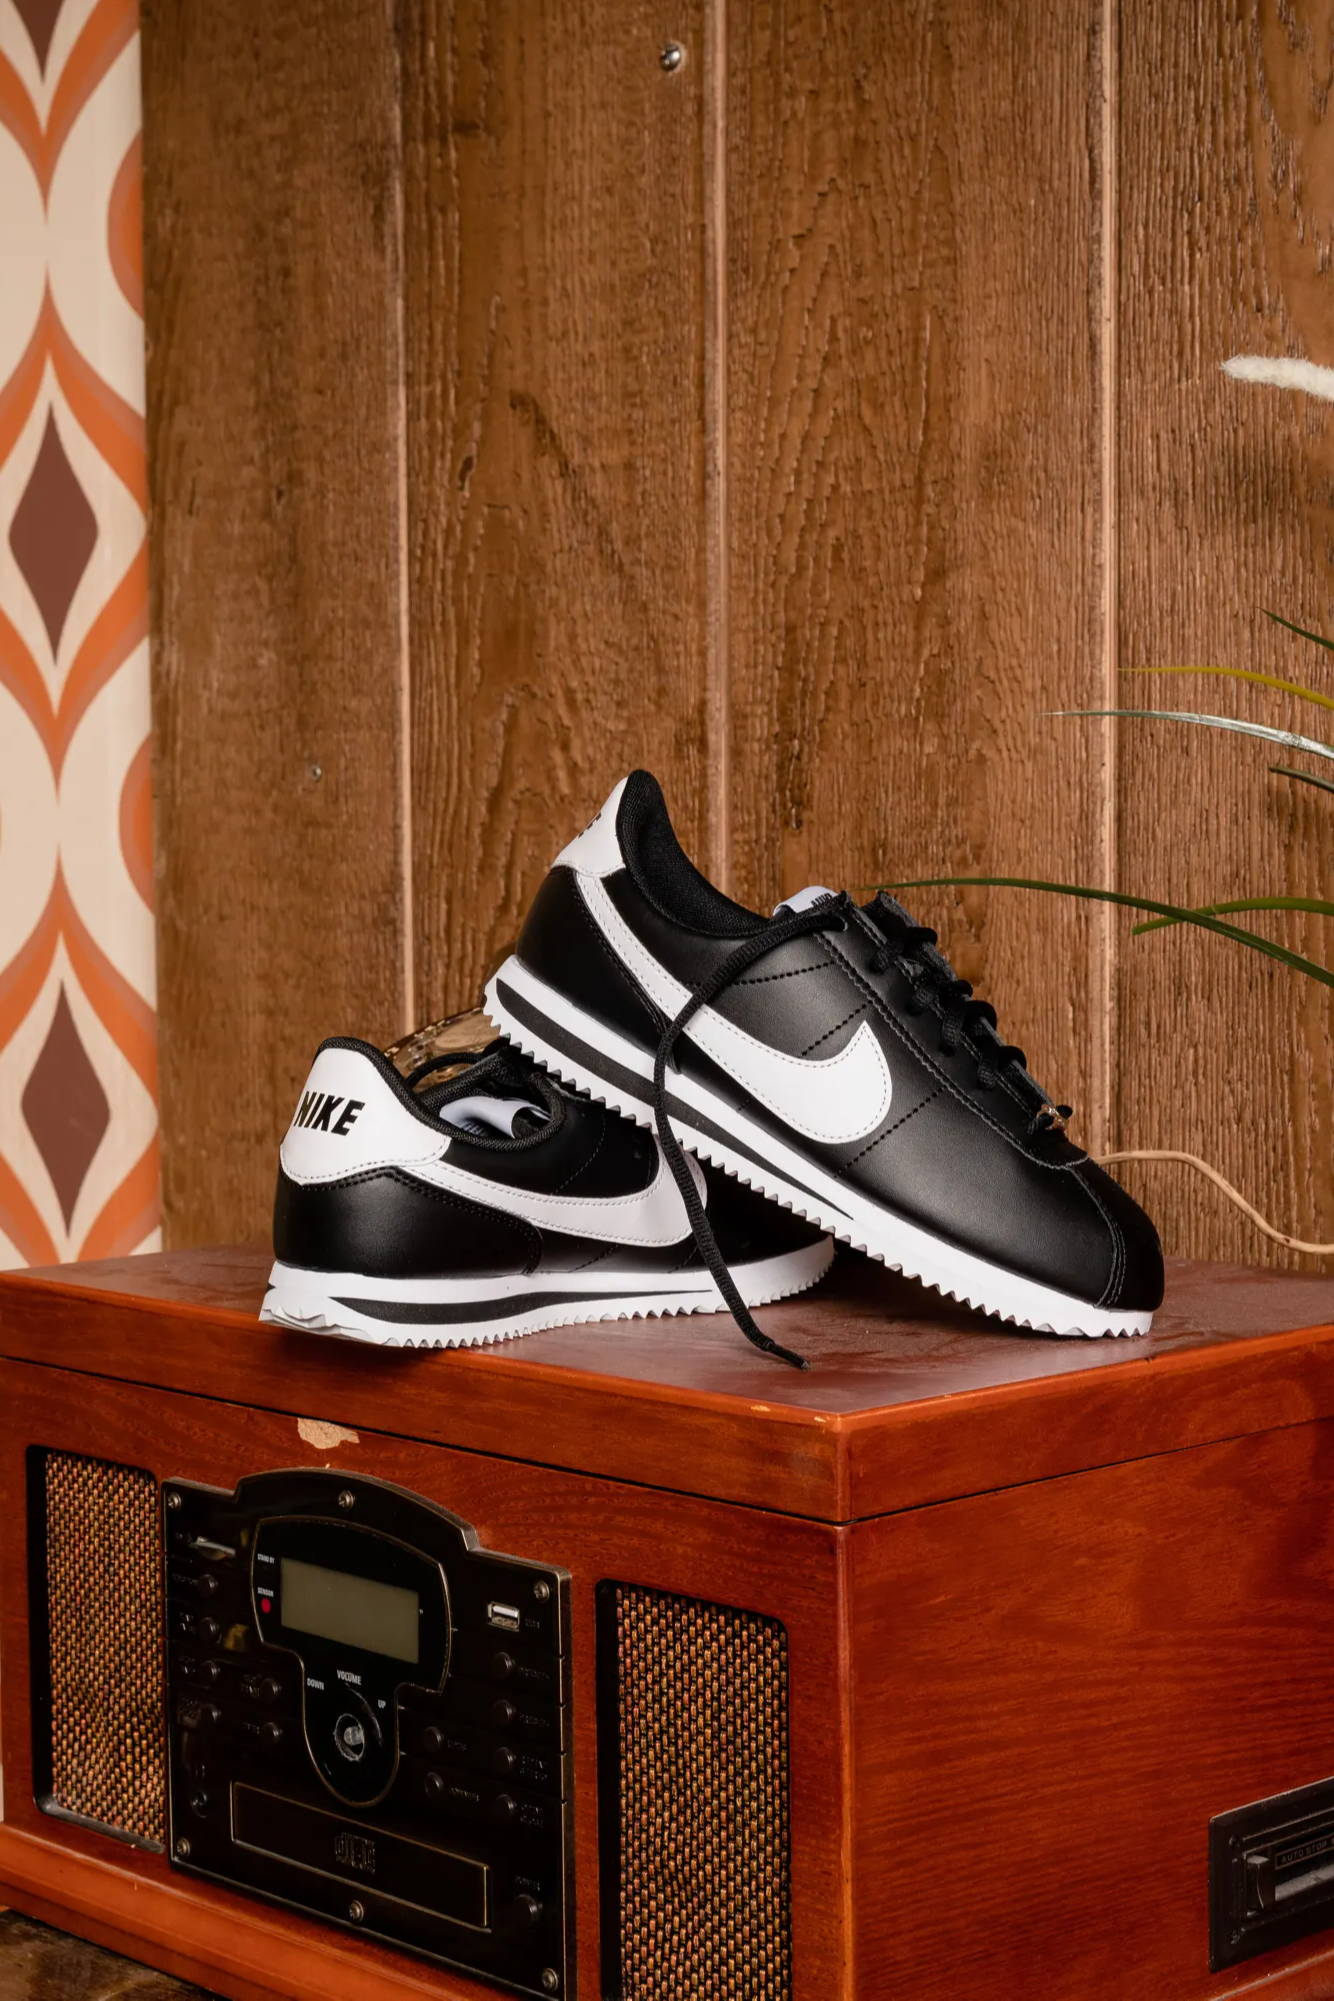 Tregua Jarra Embrión The History of the Nike Cortez | Shoe Palace Blog